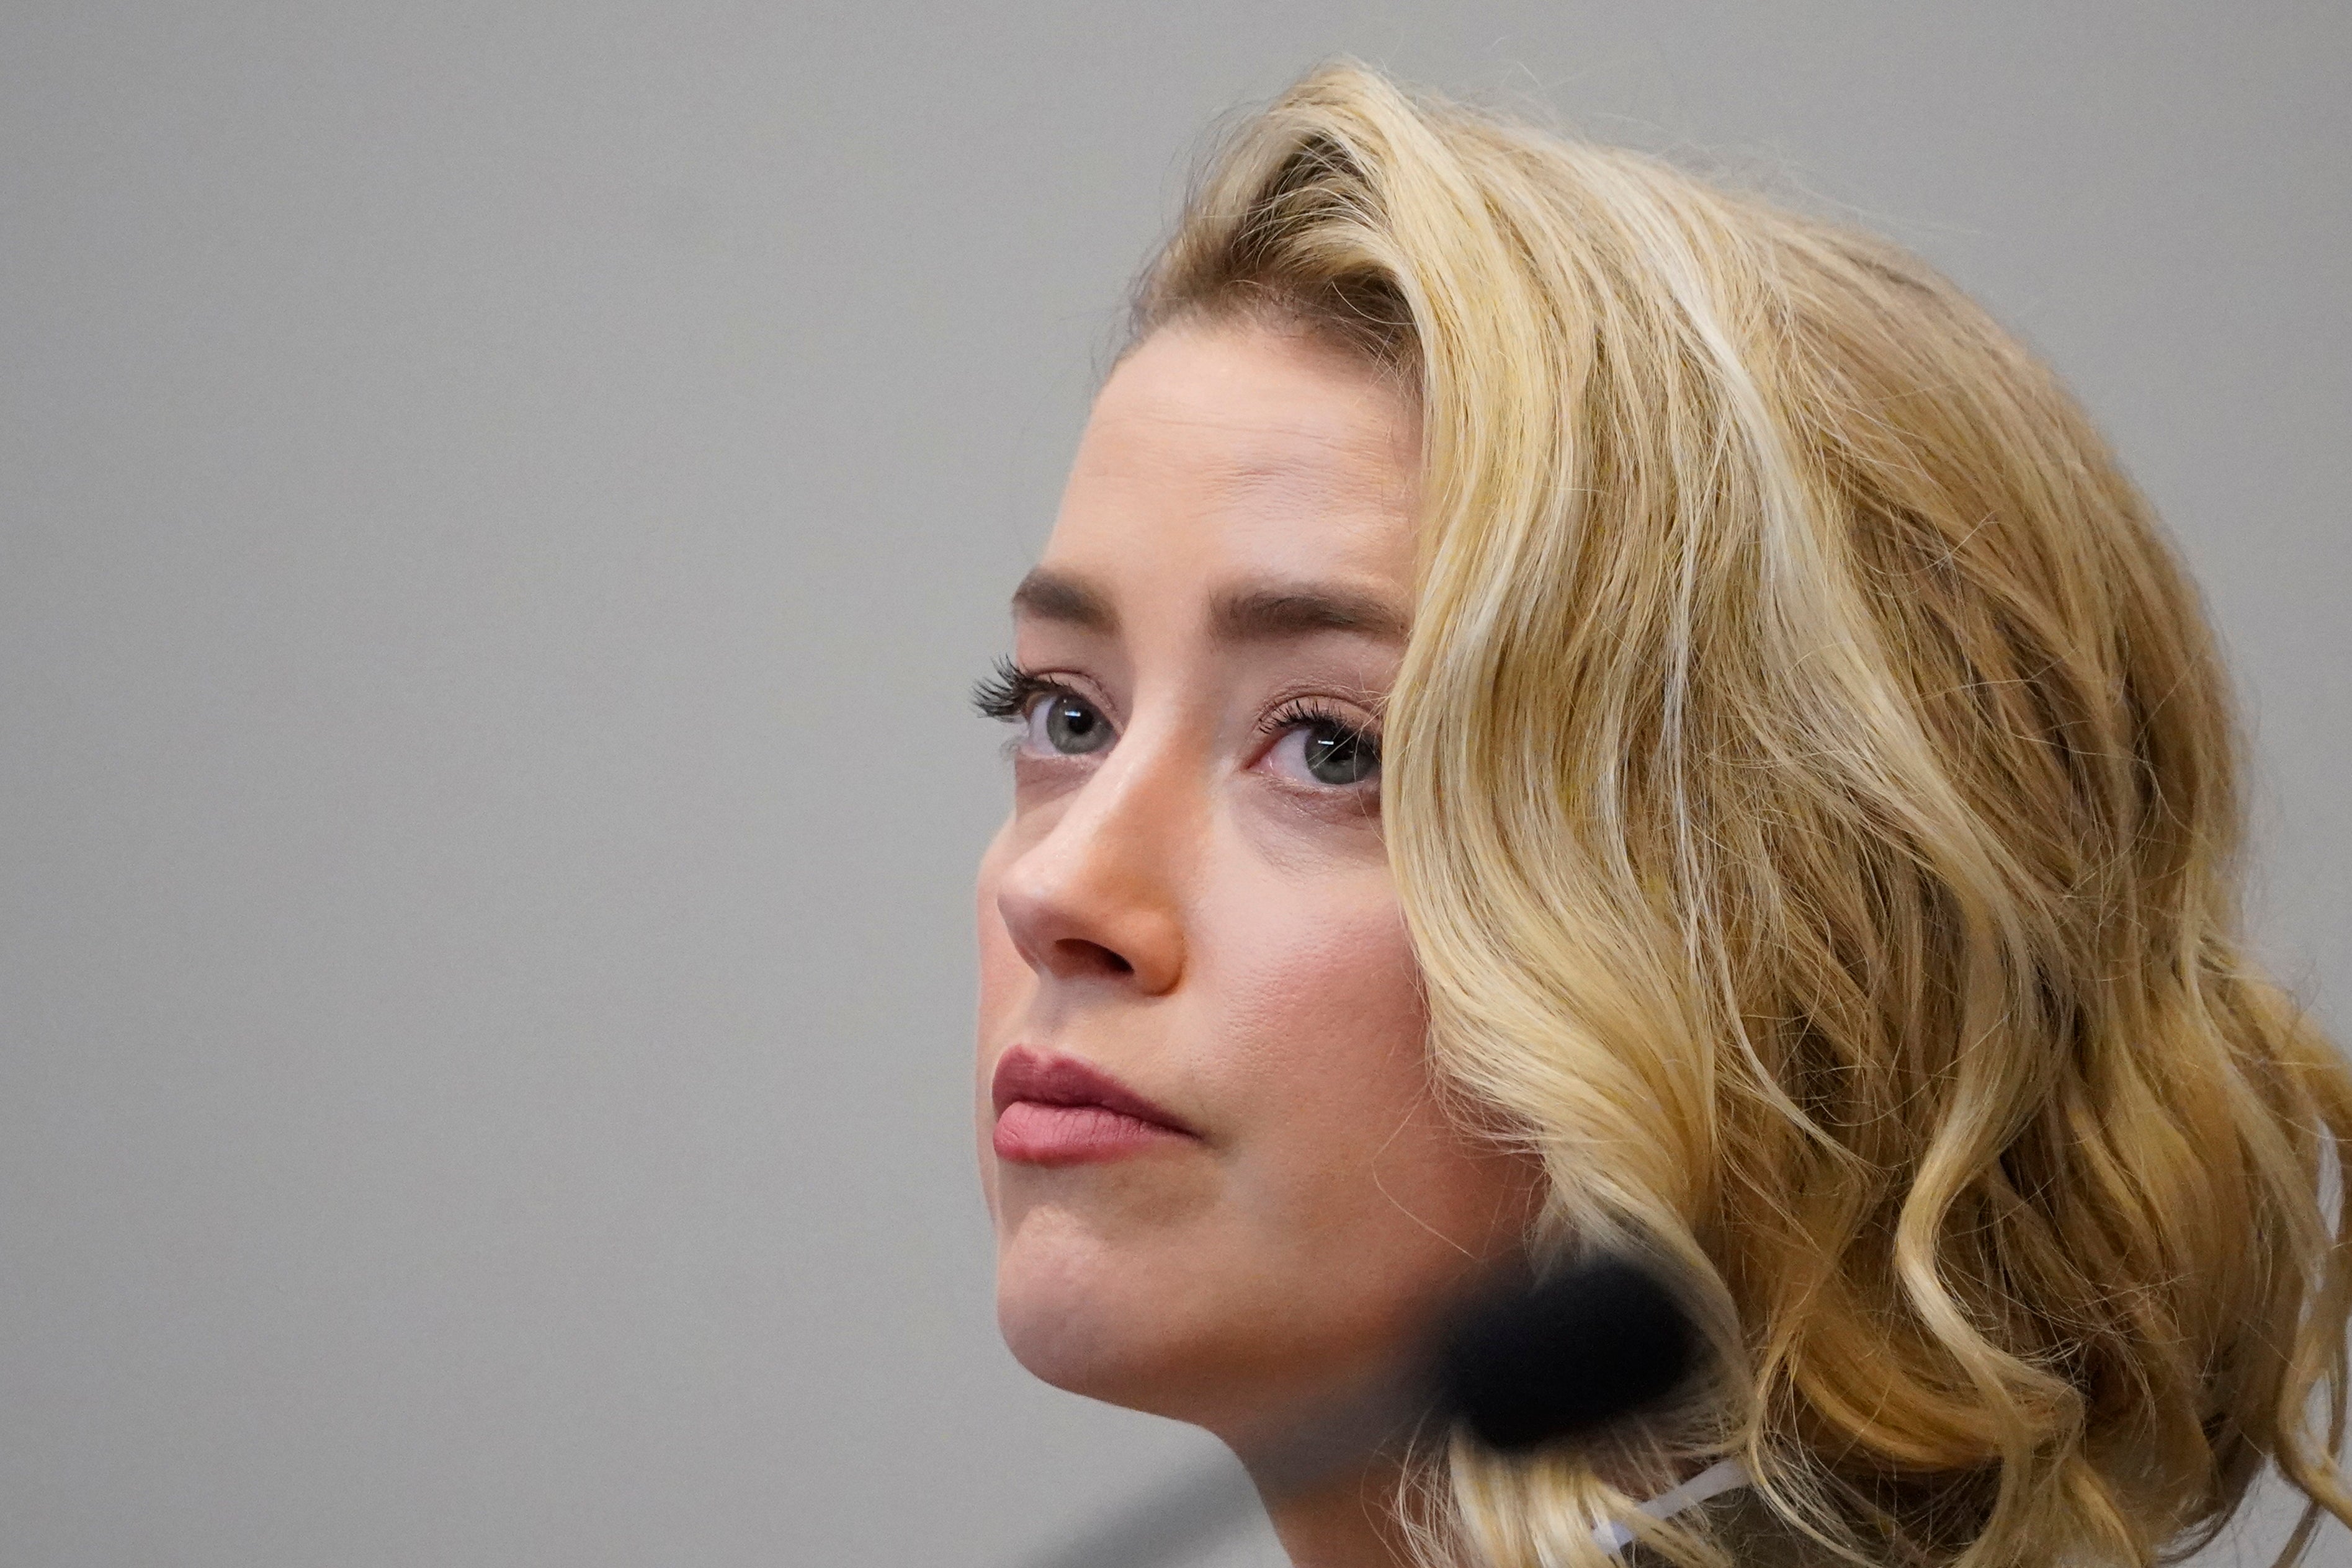 We are seeing a similar kind of coordinated campaign now against Amber Heard